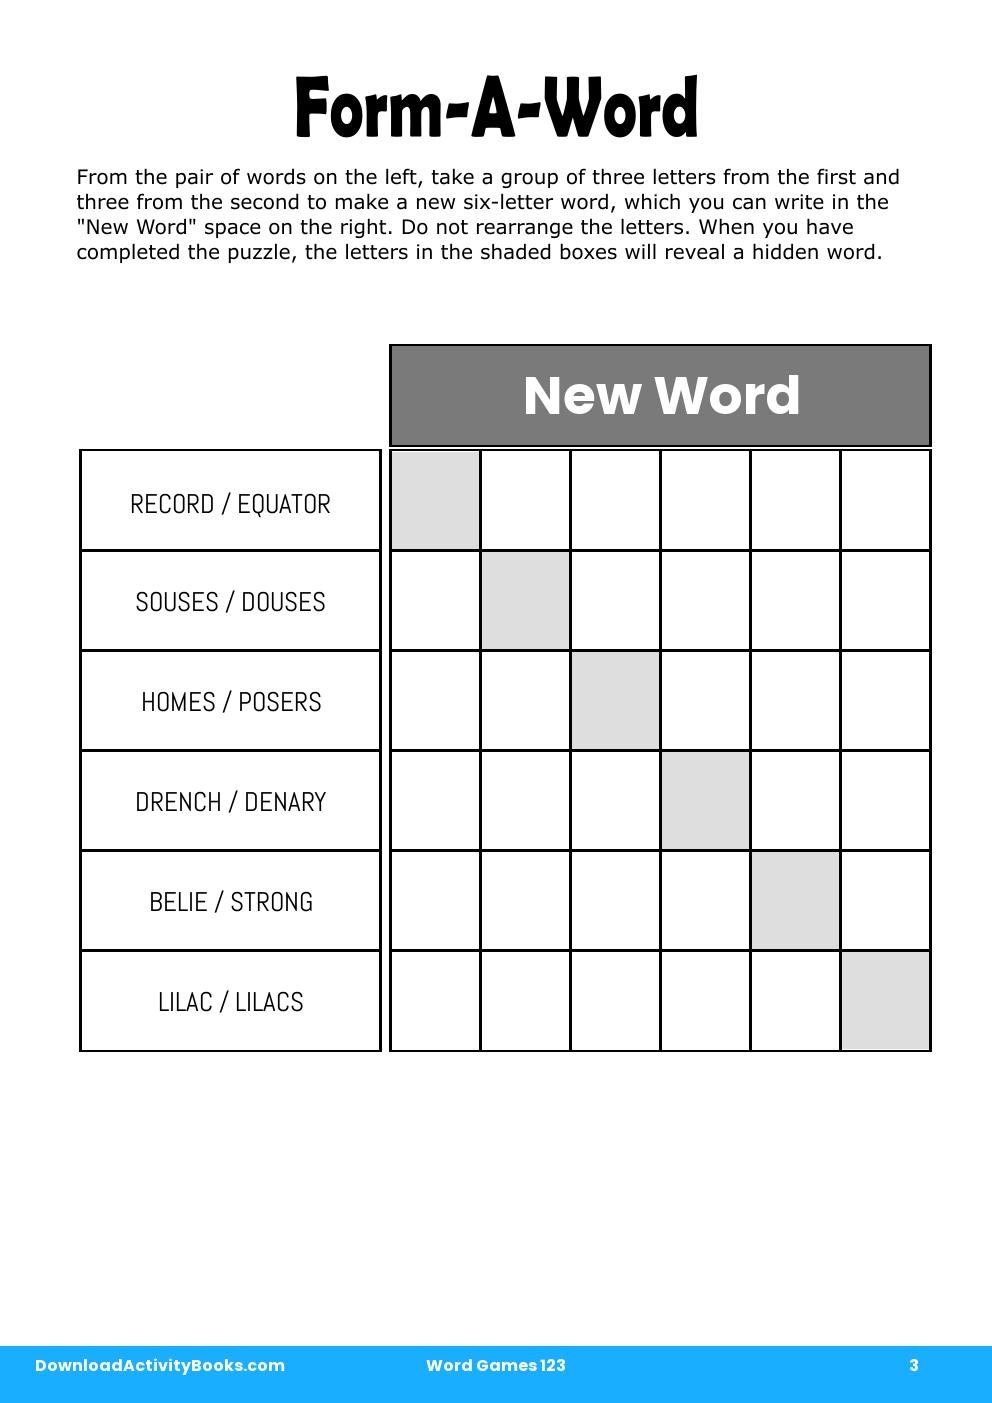 Form-A-Word in Word Games 123